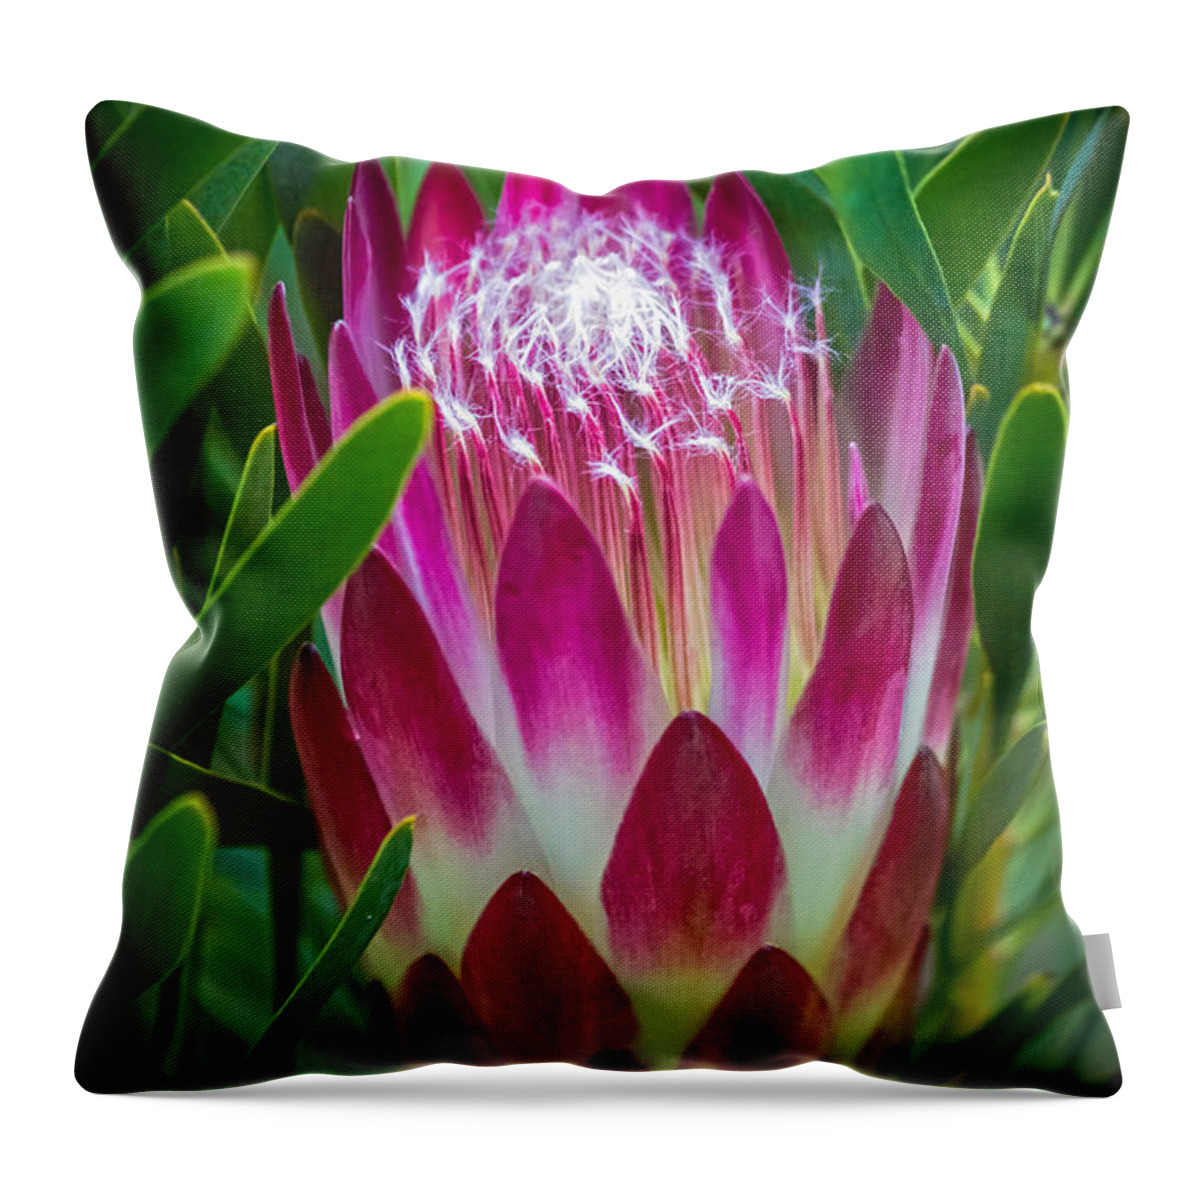 Botanical Garden Throw Pillow featuring the photograph Protea in Pink by Kate Brown